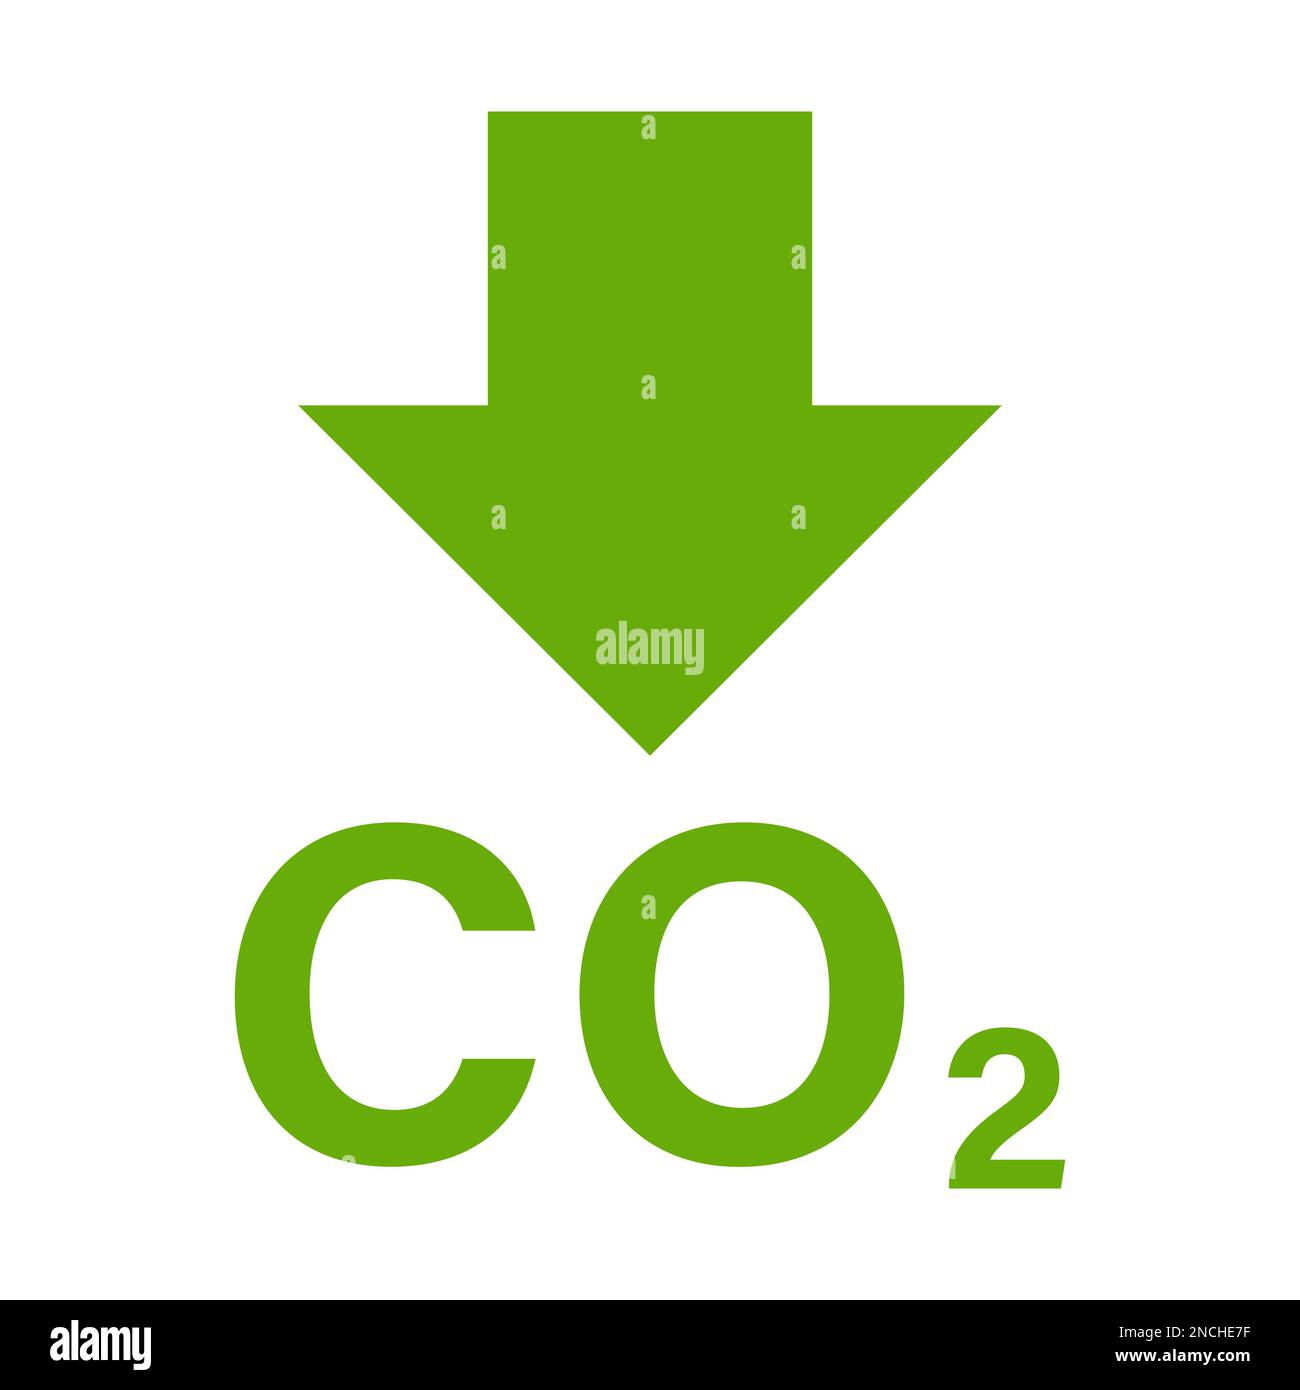 reducing CO2 emissions icon vector stop climate change sign for graphic design, logo, website, social media, mobile app, ui illustration Stock Vector